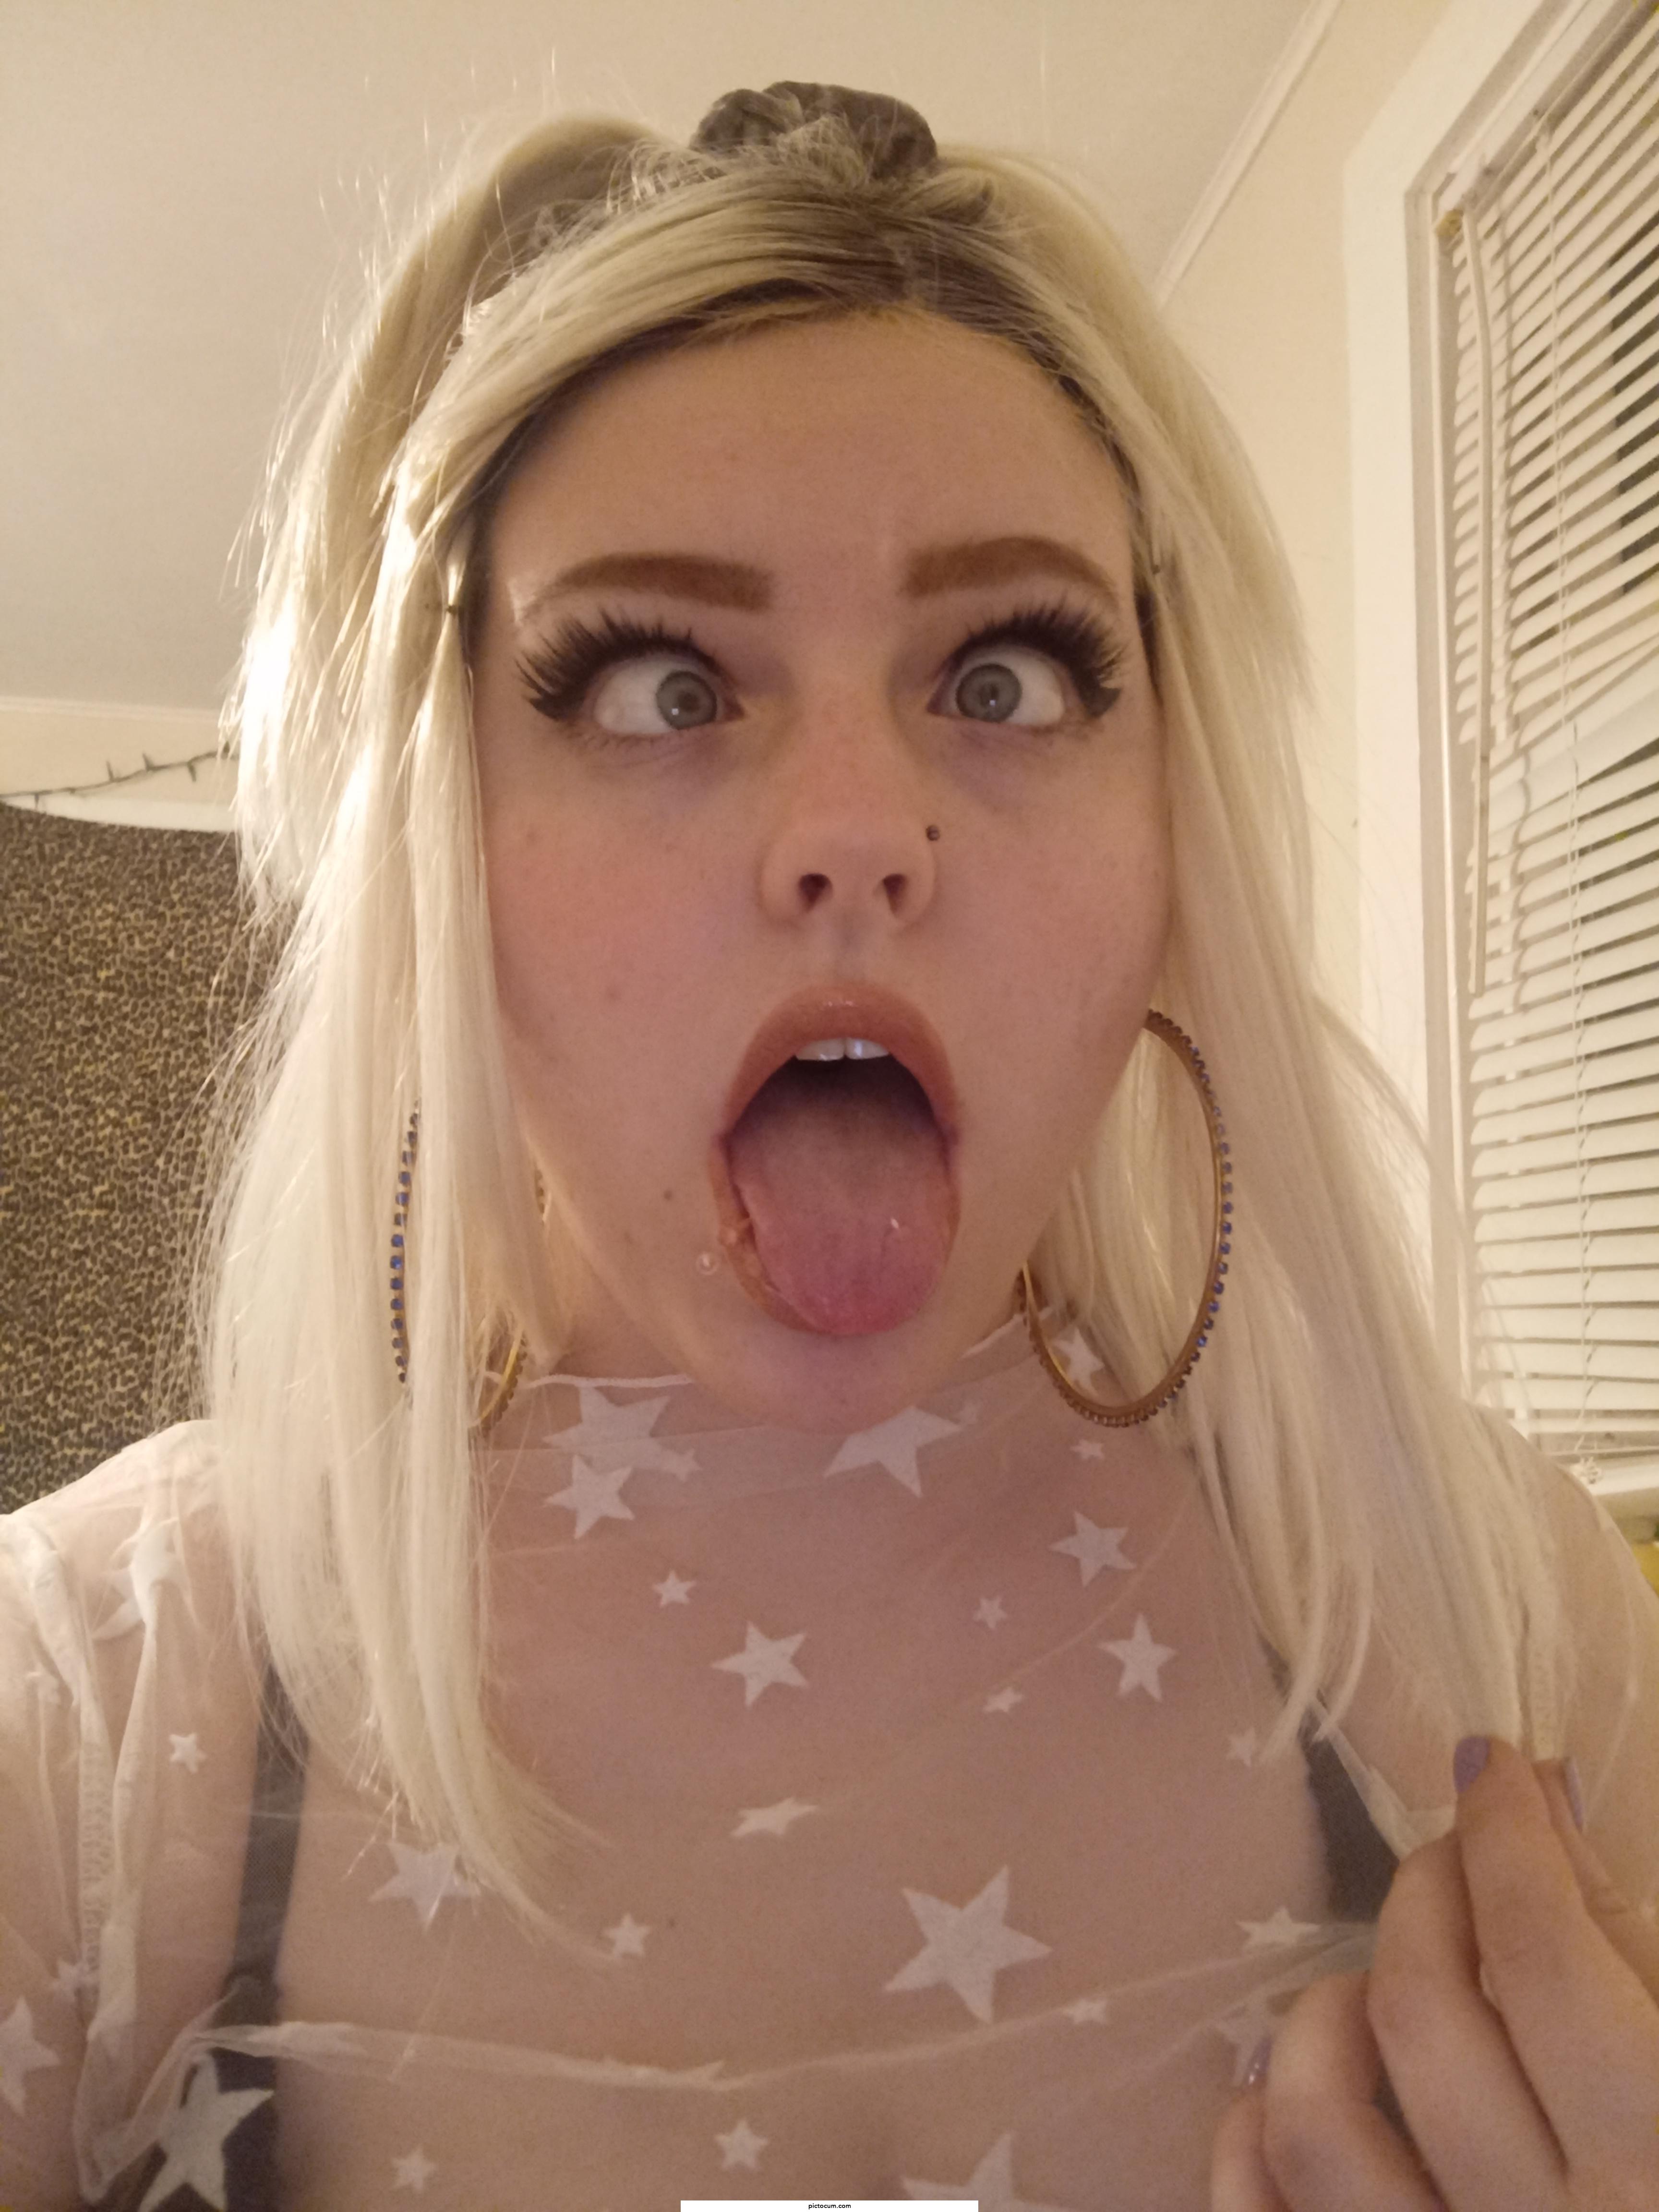 My face after bobbing up and down on your cock 🥴